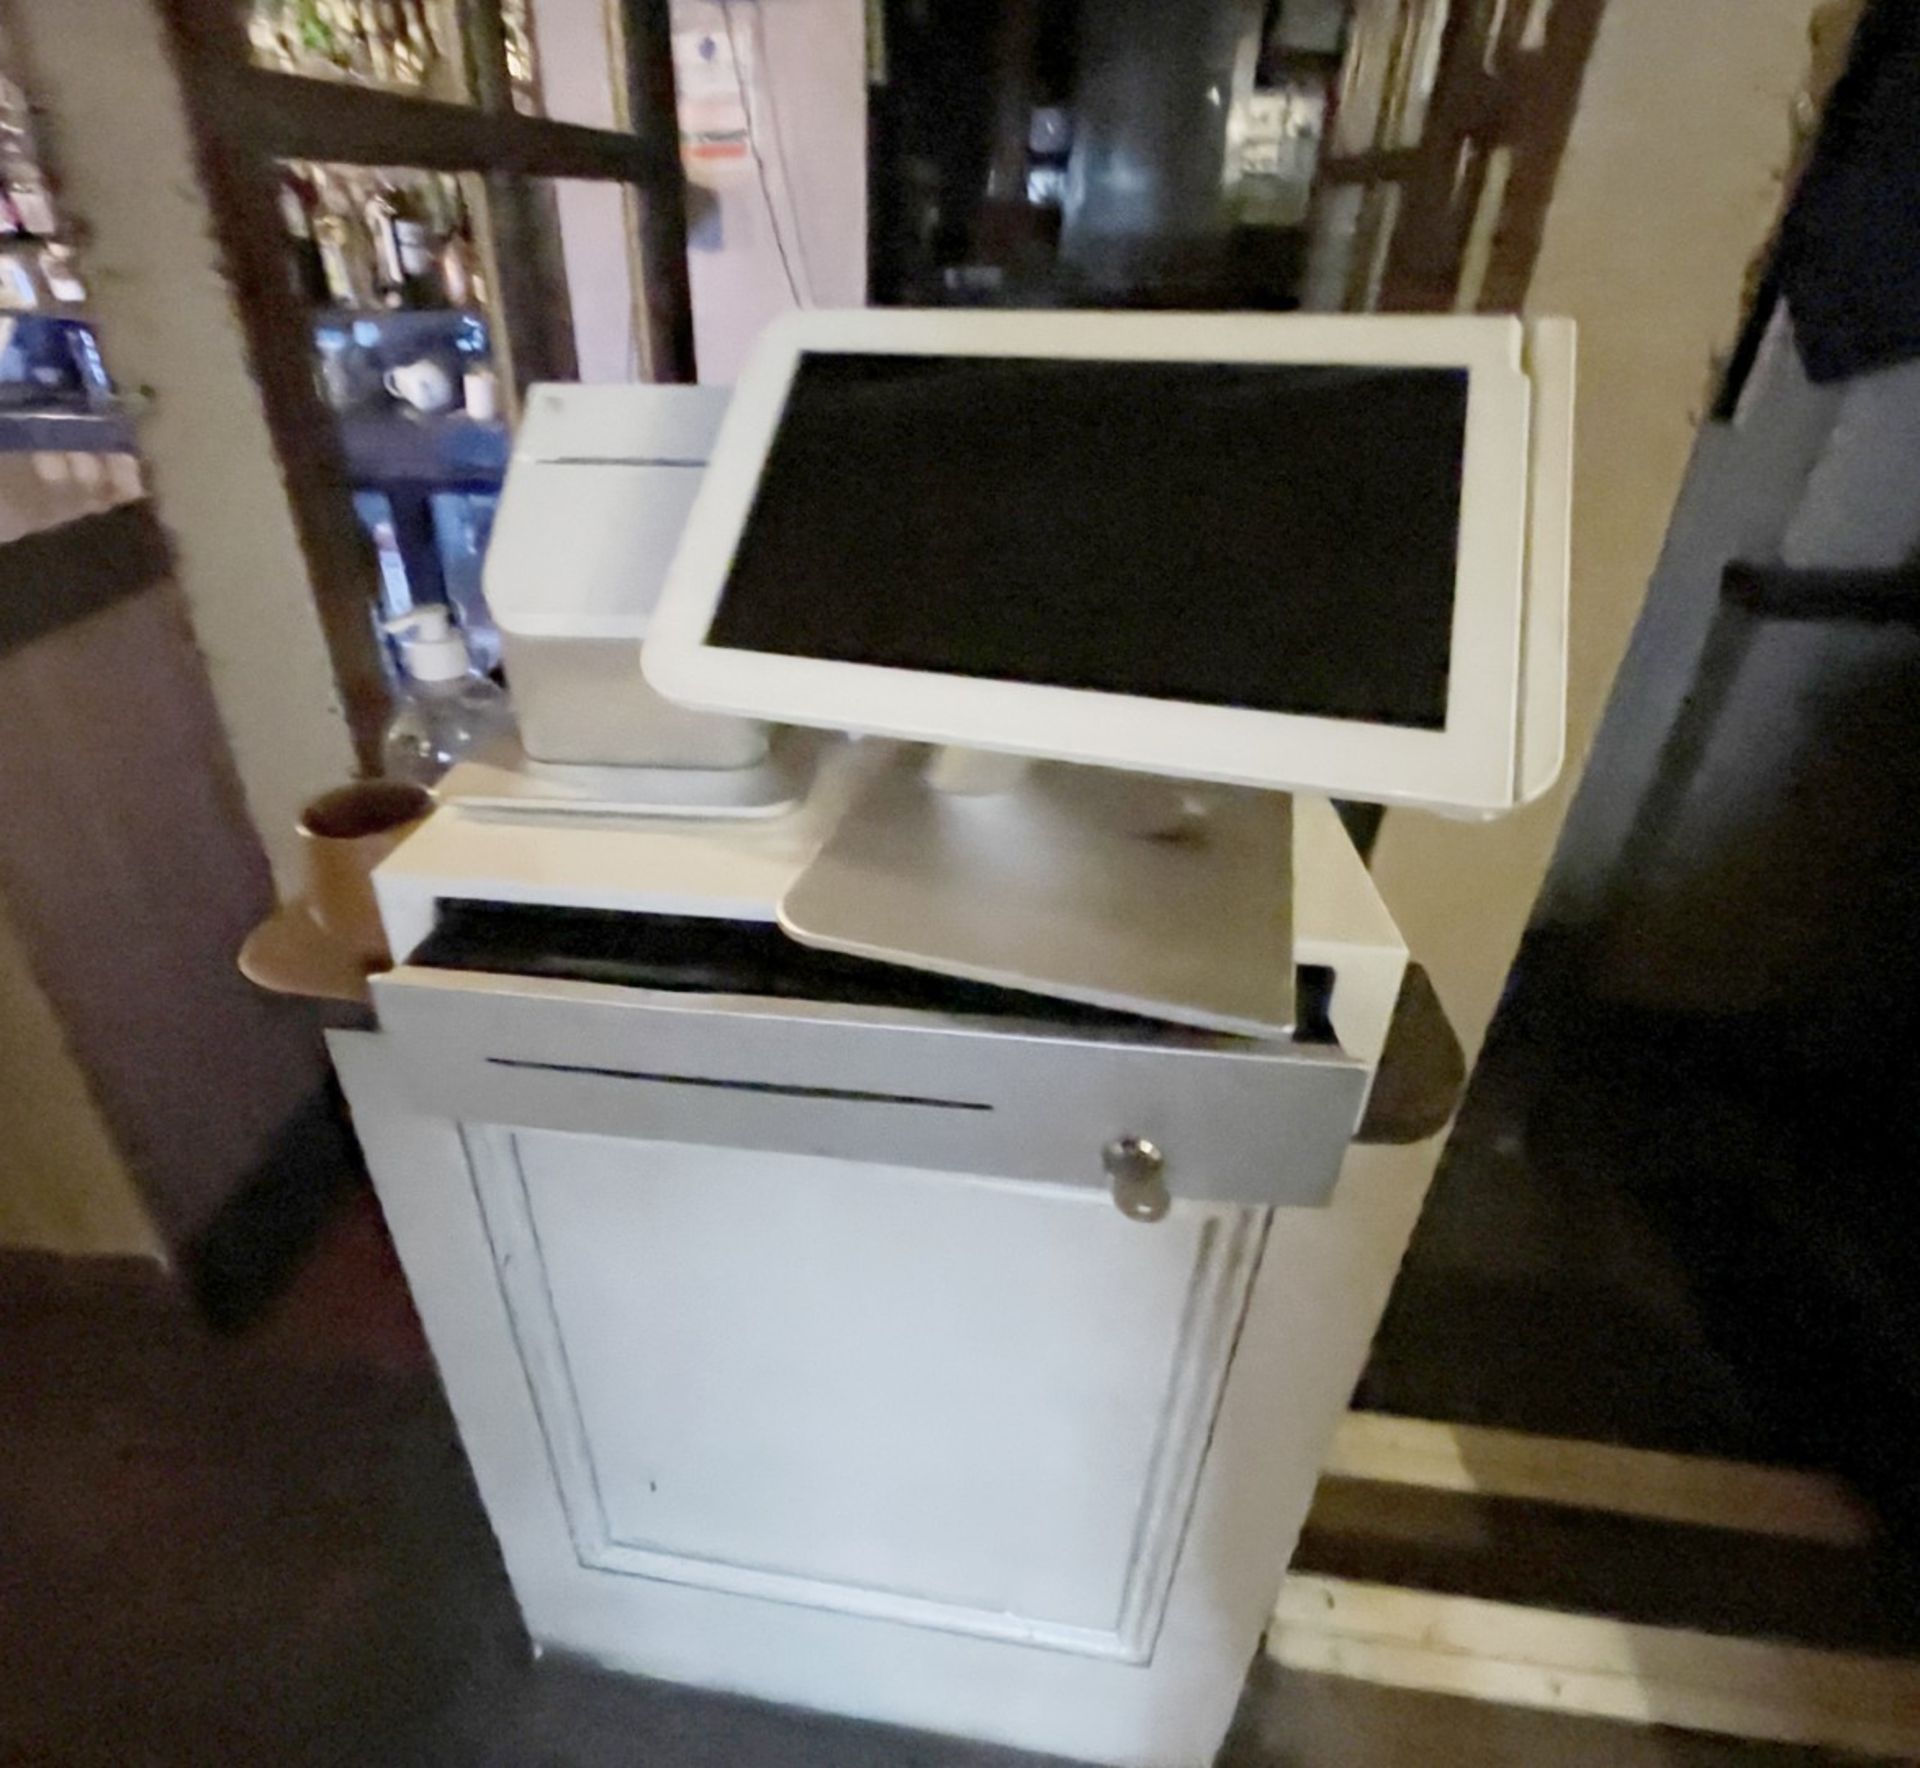 1 x CLOVER Station POS System Including a 11.6" Touch Screen Terminal, Receipt Printer & Cash Drawer - Image 2 of 6